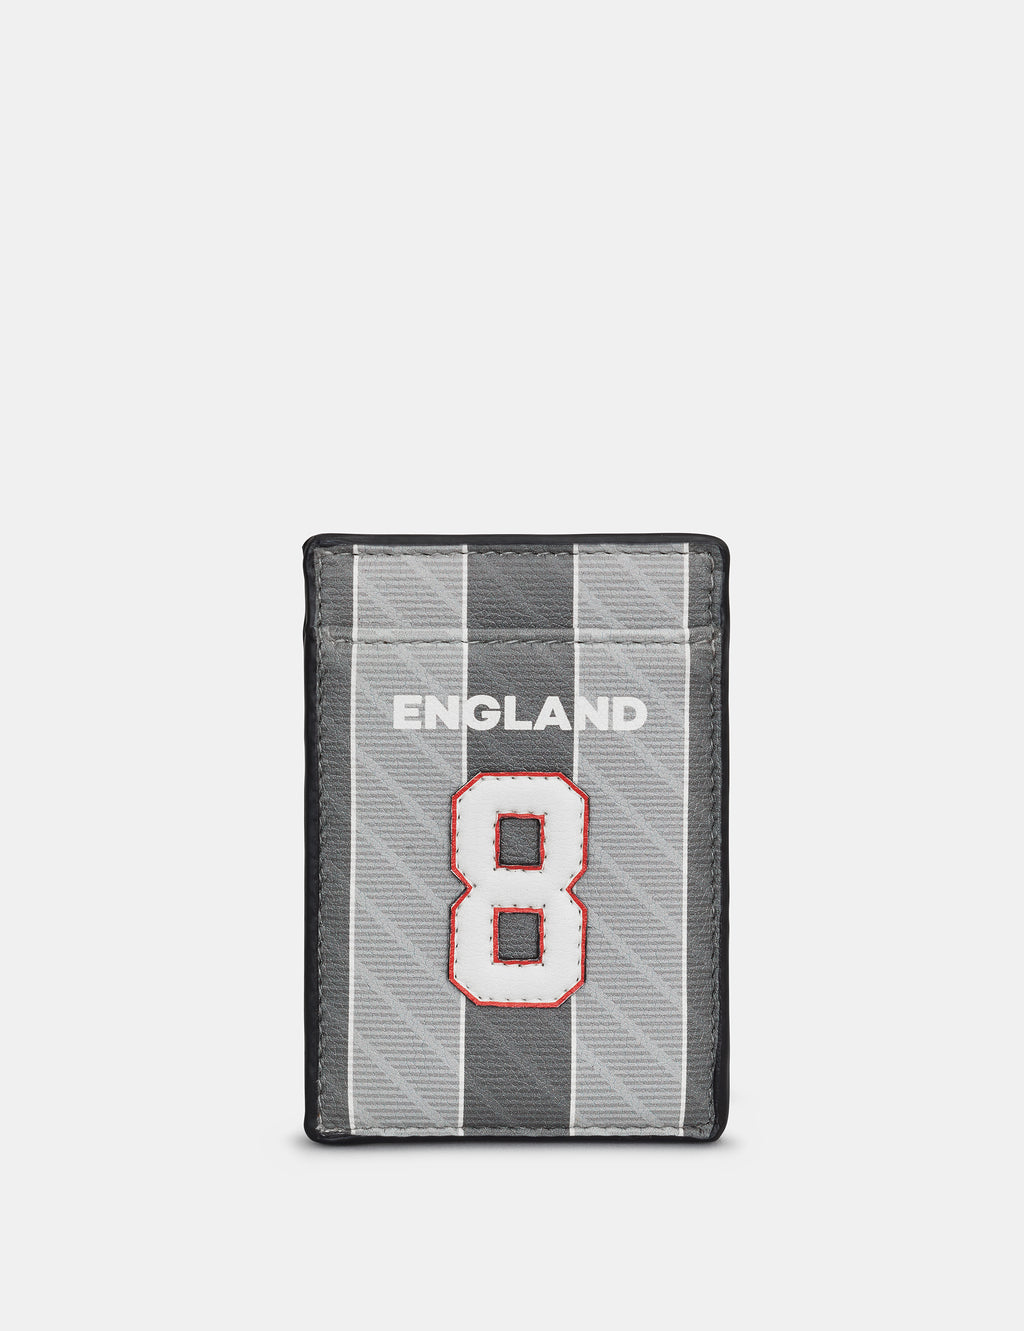 England Legends 8 Compact Leather Card Holder